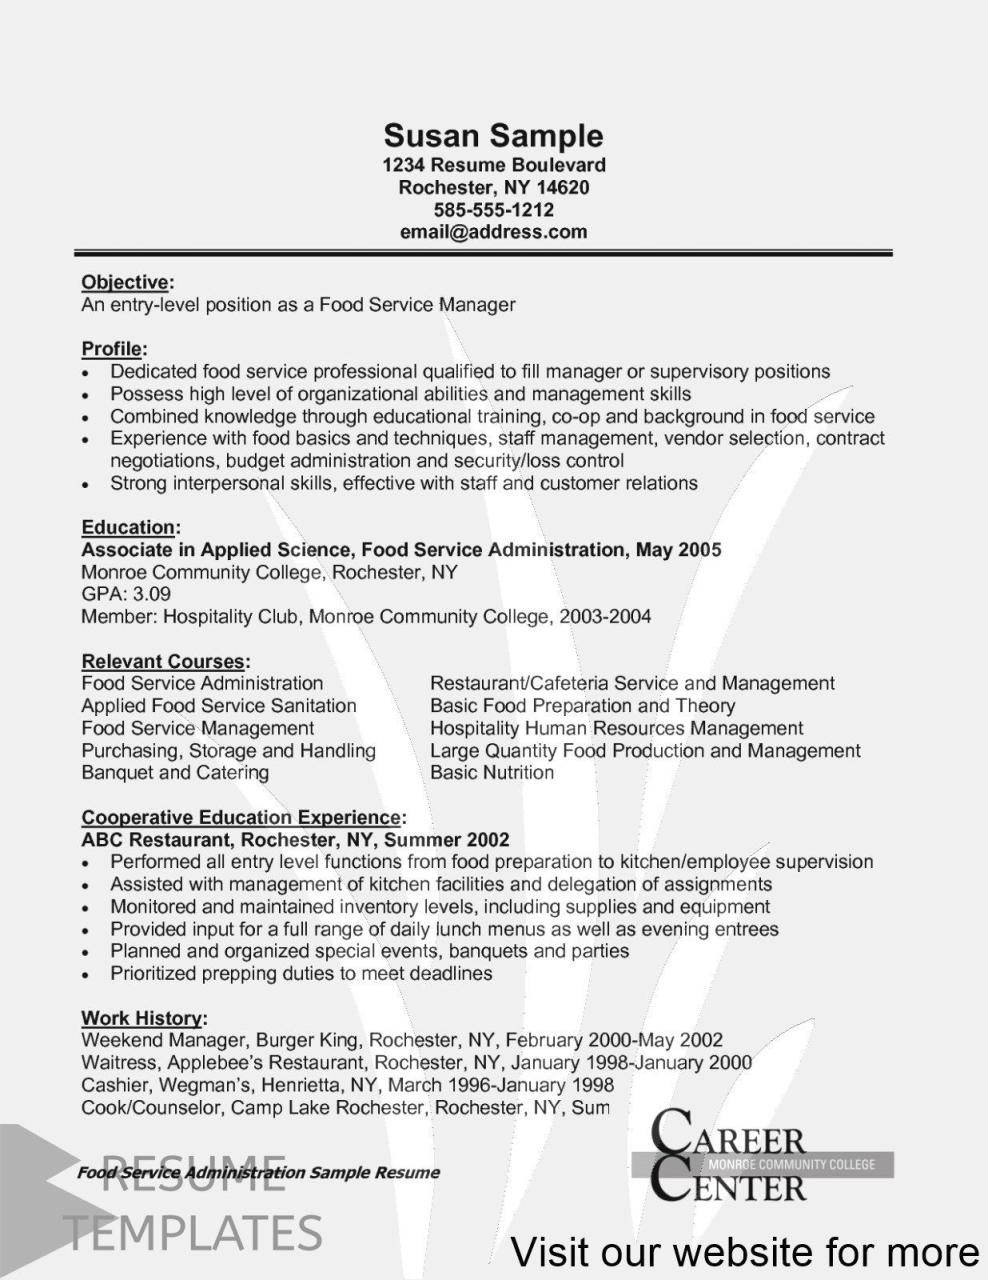 Contract Position On Resume Example